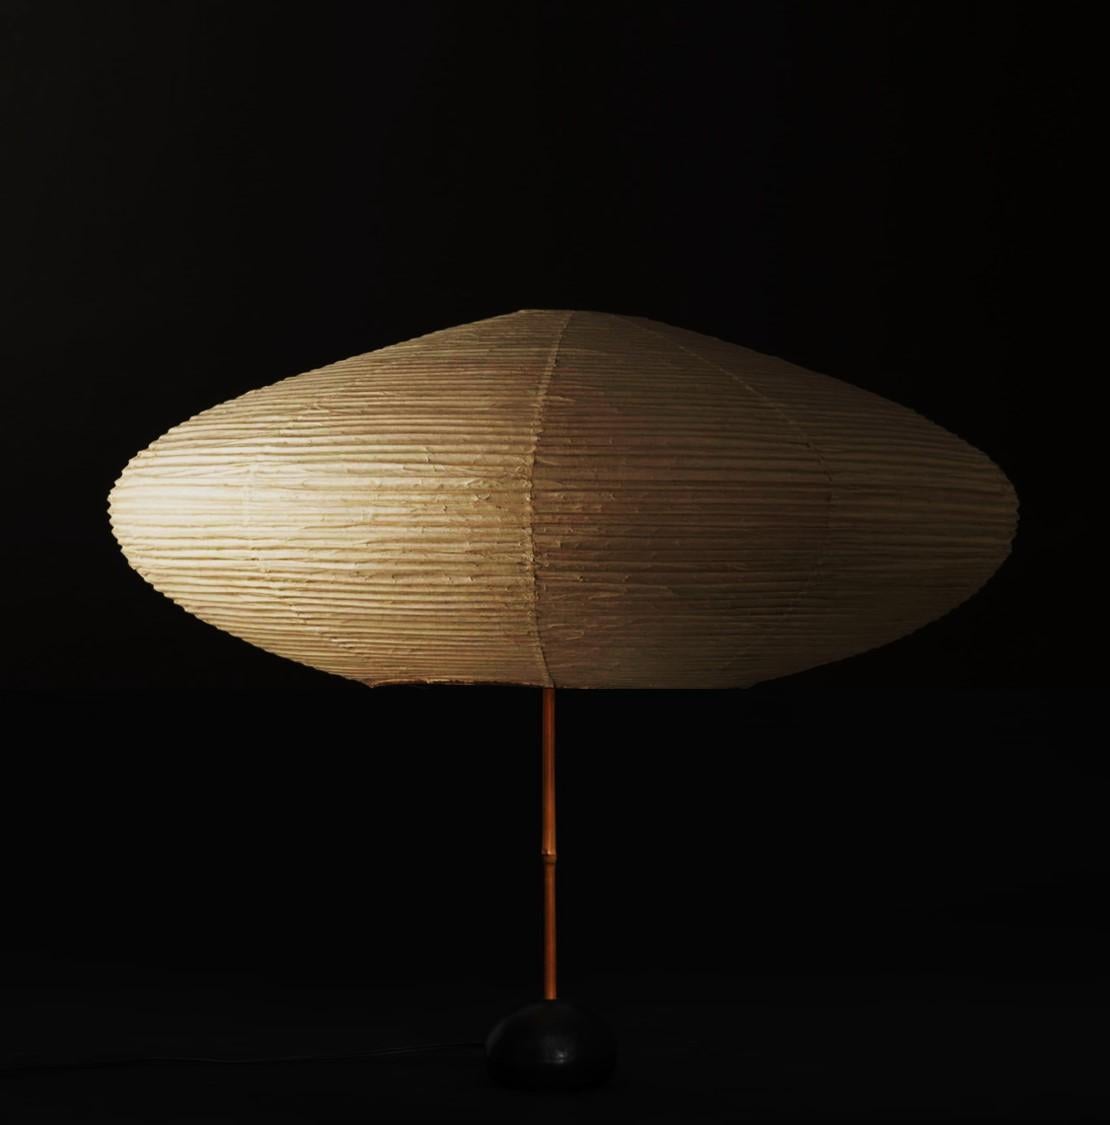 ISAMU NOGUCHI
Akari model “21A” on BB2 Base 
Original shade in washi, bamboo rings & bamboo rims
Structure in black lacquered metal
Hand-made form realized by Ozeki Company, Gifu, Japan
Series started in 1951
Height: 26 in. / Diameter: 25 1/2 in.